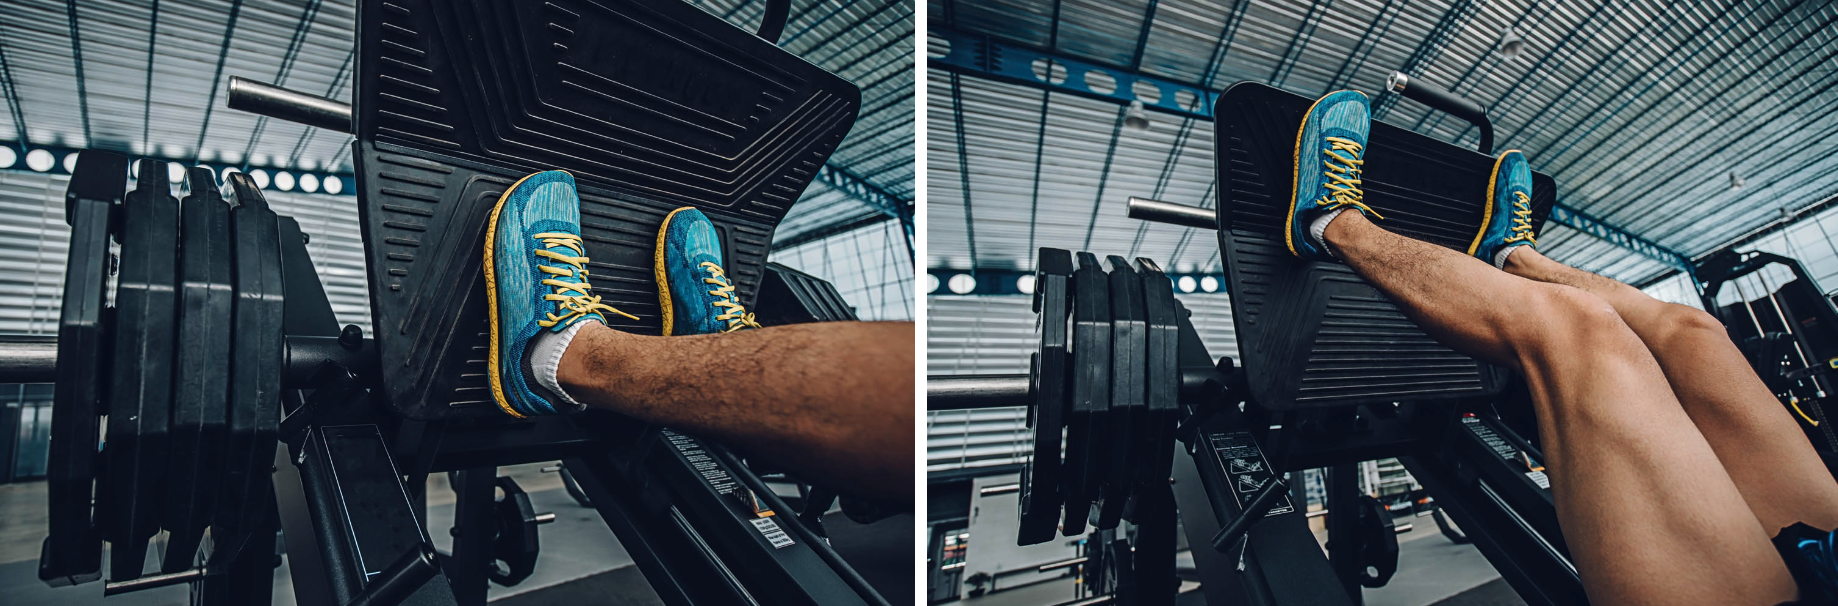 Feet and legs showing different foot positioning on the leg press machine. Narrower stance on the right showing more quad activation and wider stance on the right showing more glute and hamstring activation.